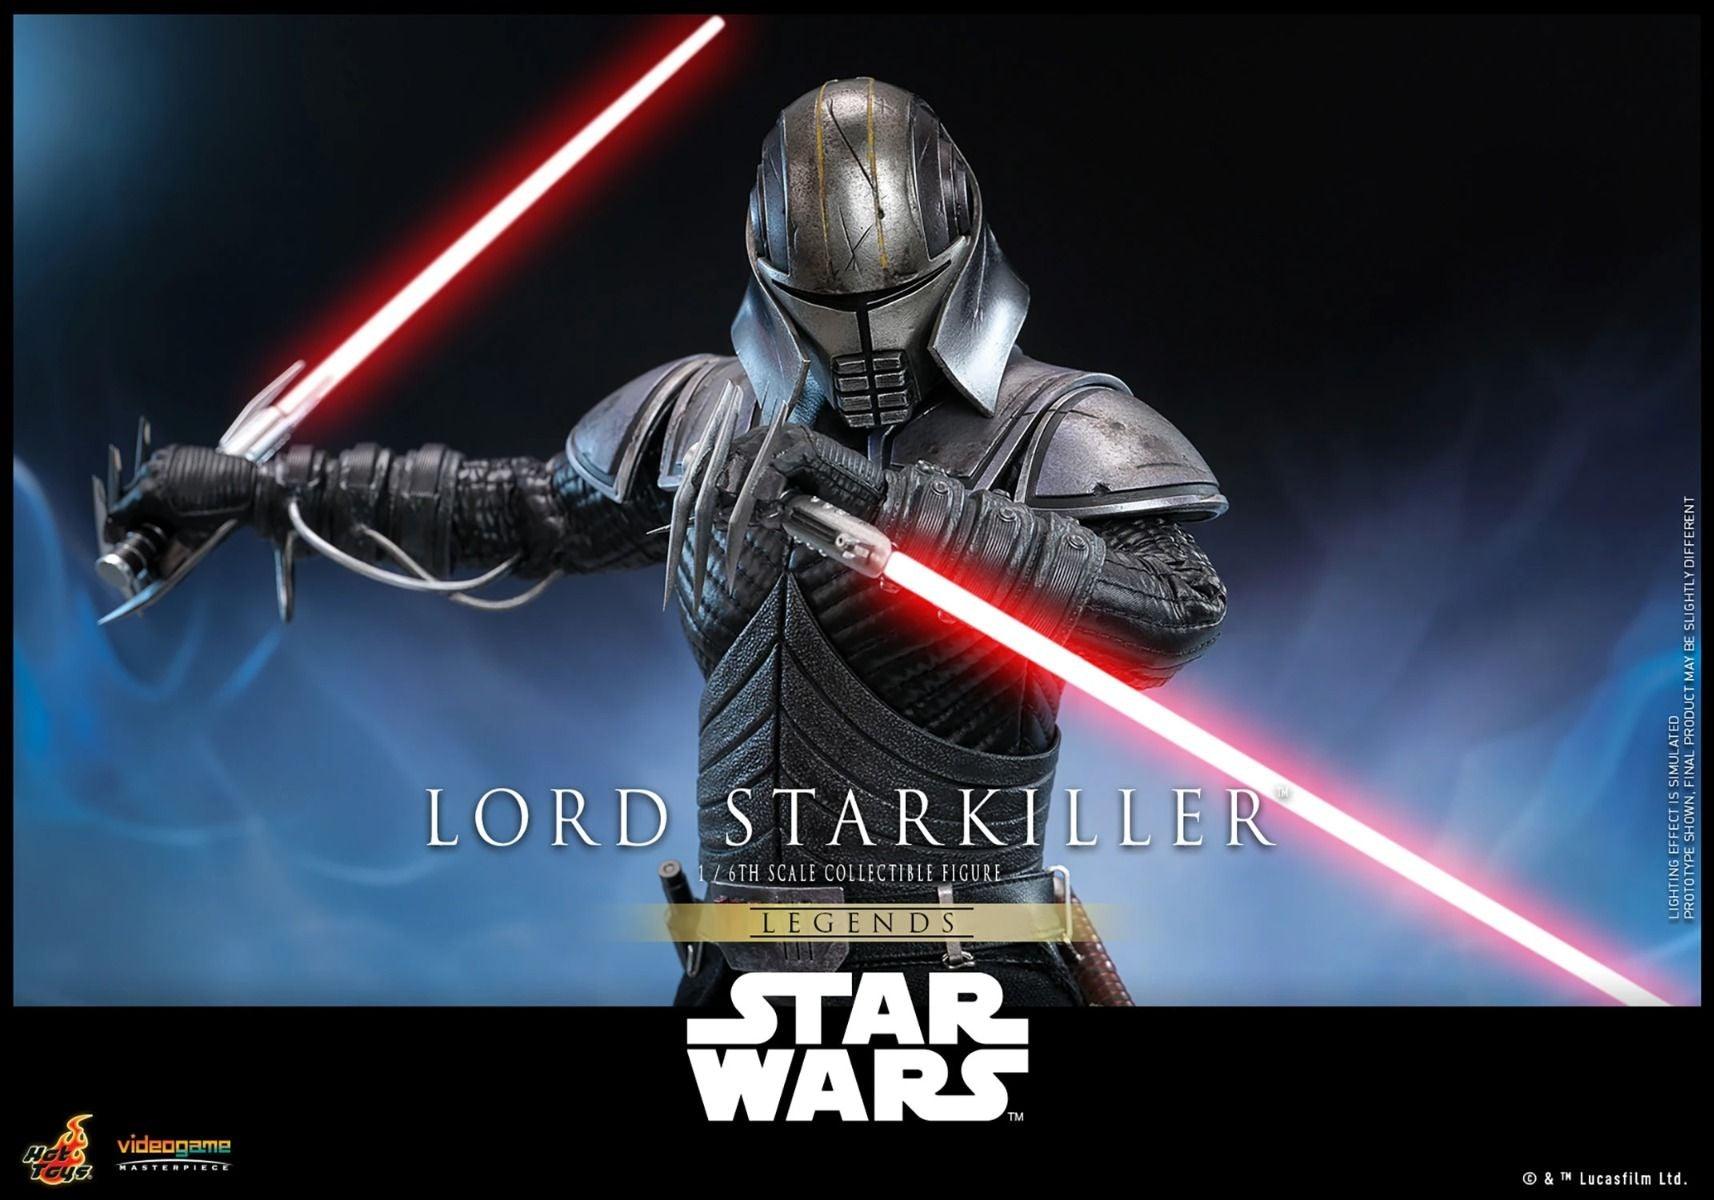 HOTVGM63 Star Wars - Lord Starkiller 1:6 Scale Collectable Action Figure - Hot Toys - Titan Pop Culture